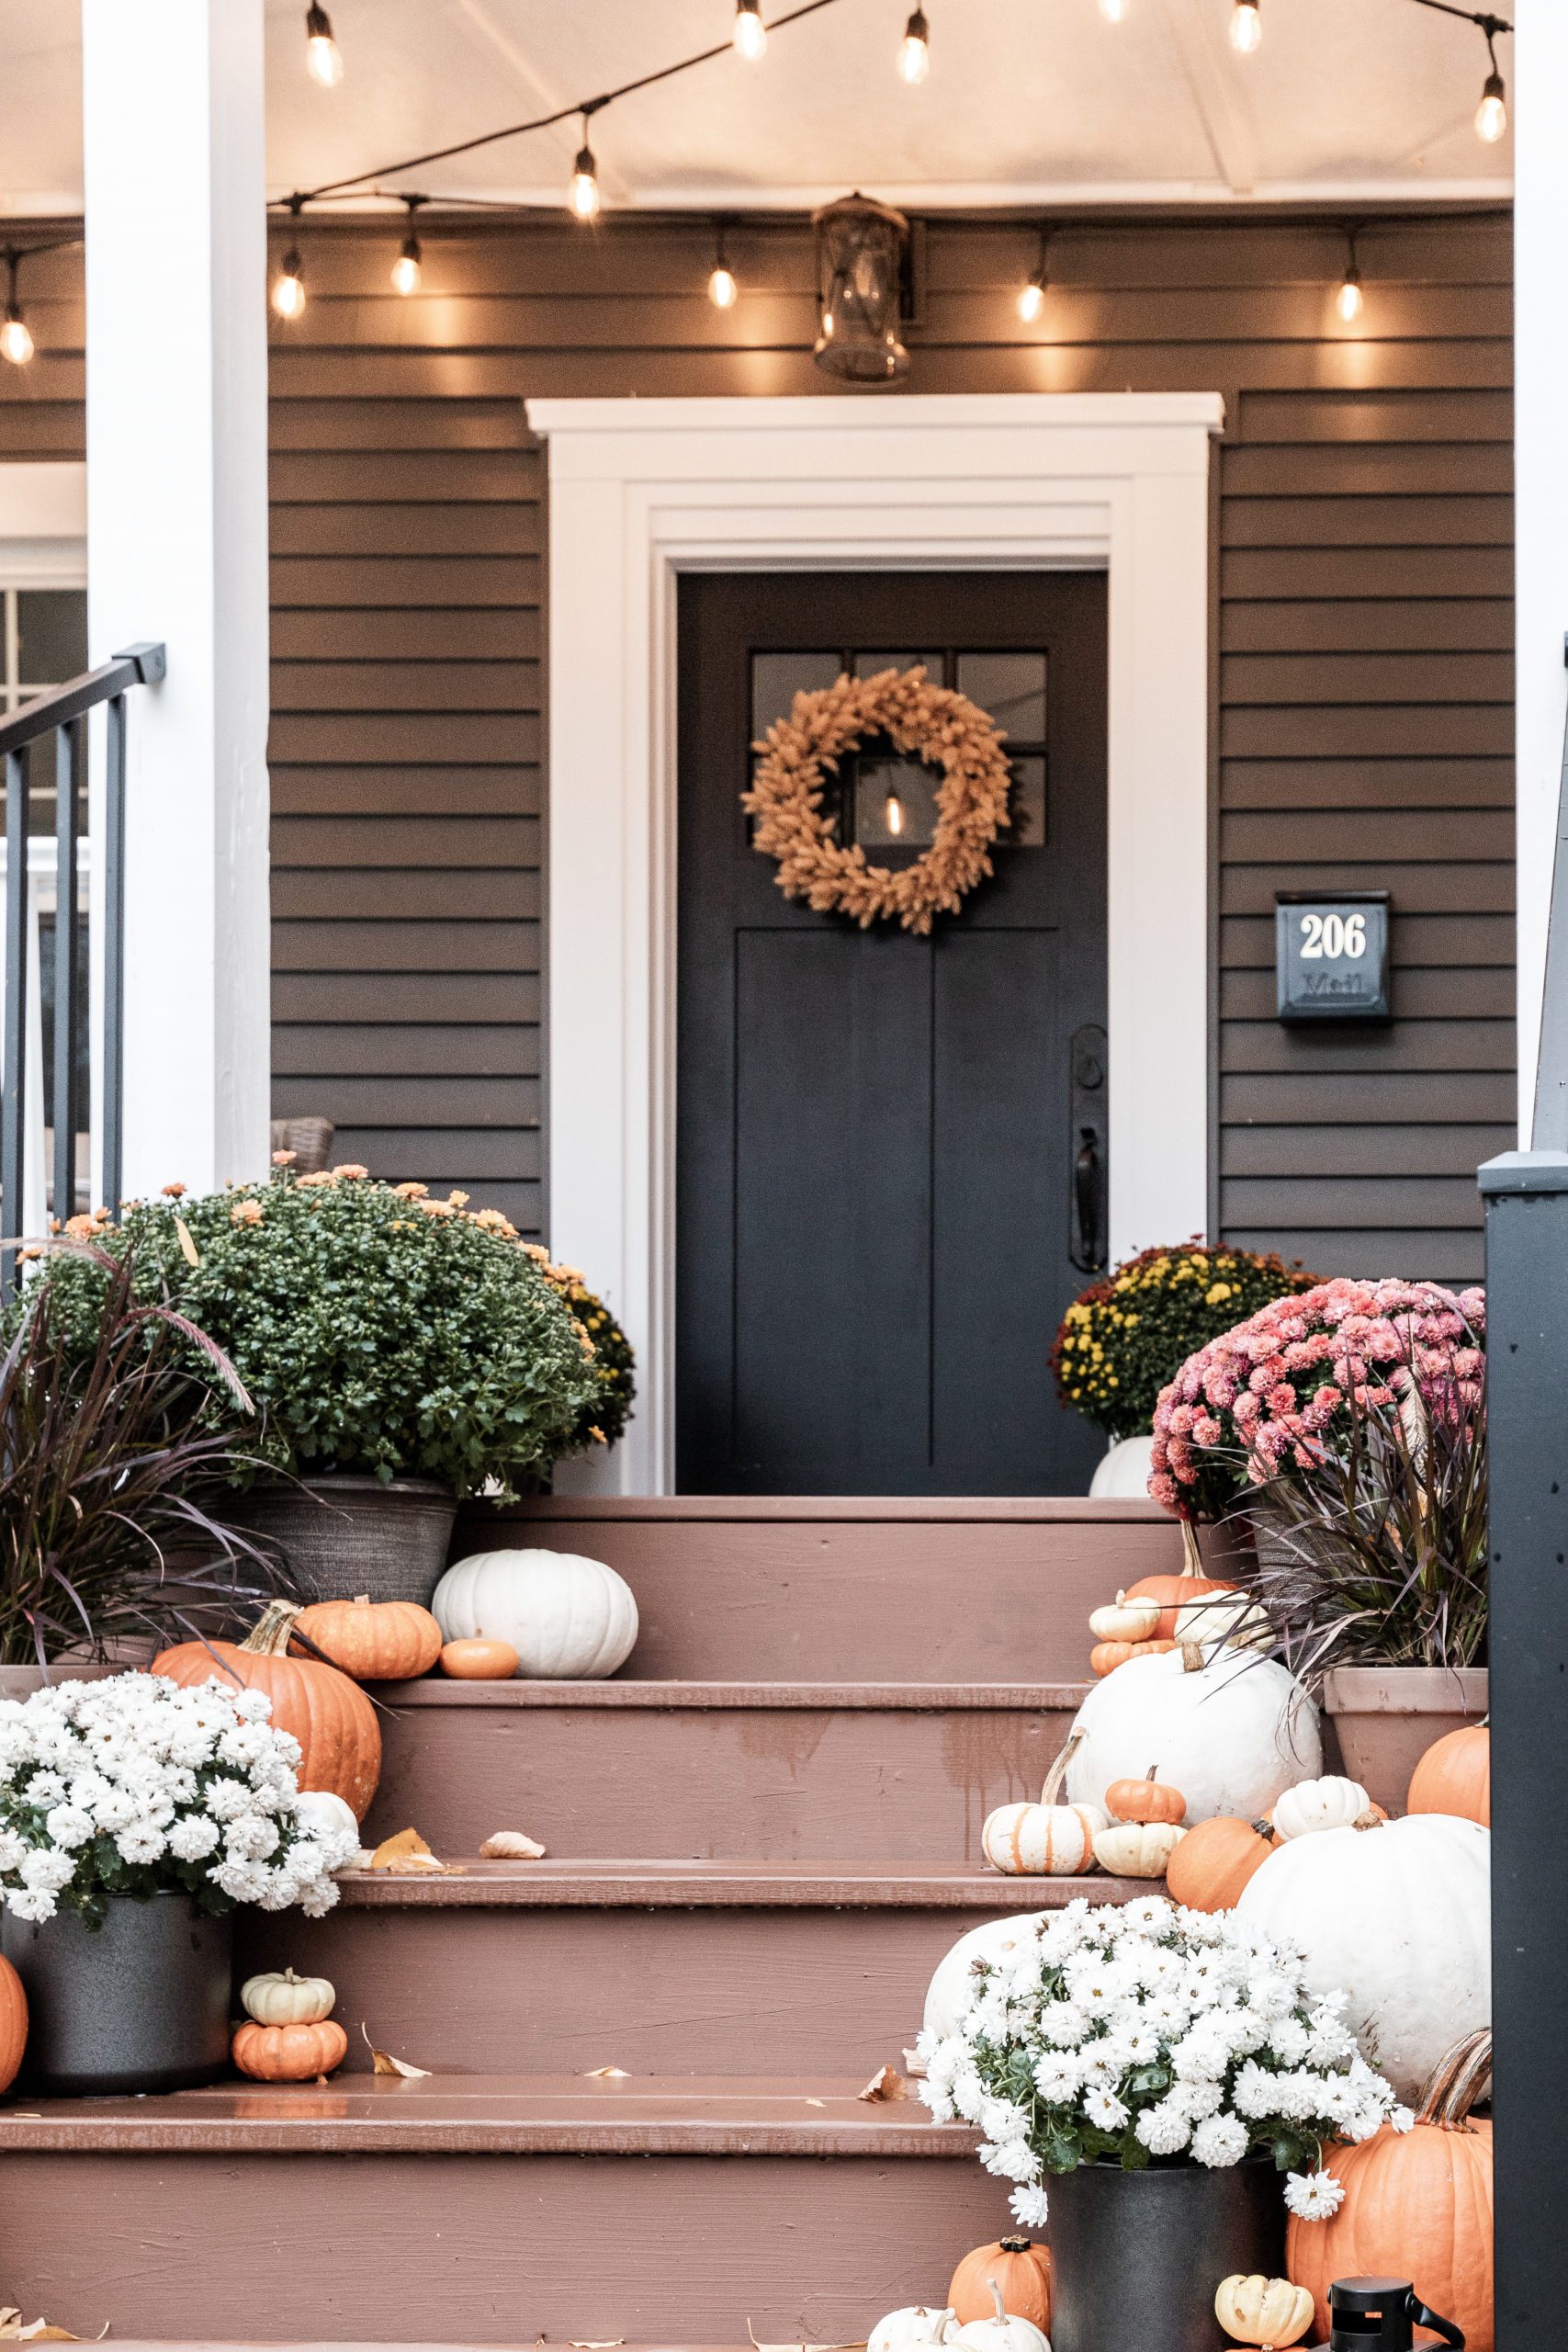 Easy Fall Porch Decor Ideas Anyone Can Do - Cherished Bliss